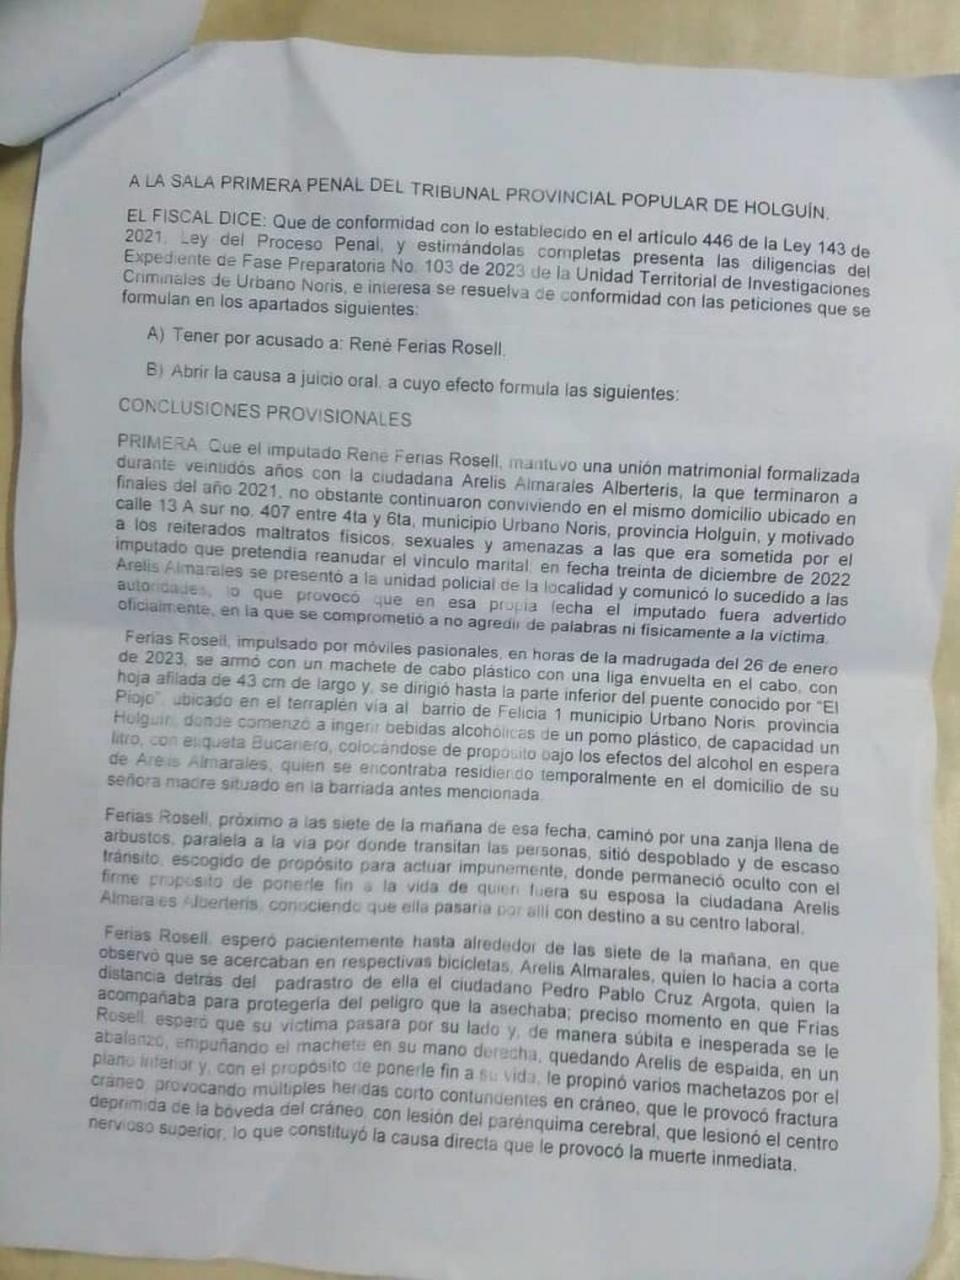 A page in the sentencing document issued by the provincial court in Holguín, Cuba, describes how René Ferias killed her ex-wife Arelis Almarales Alberteris.